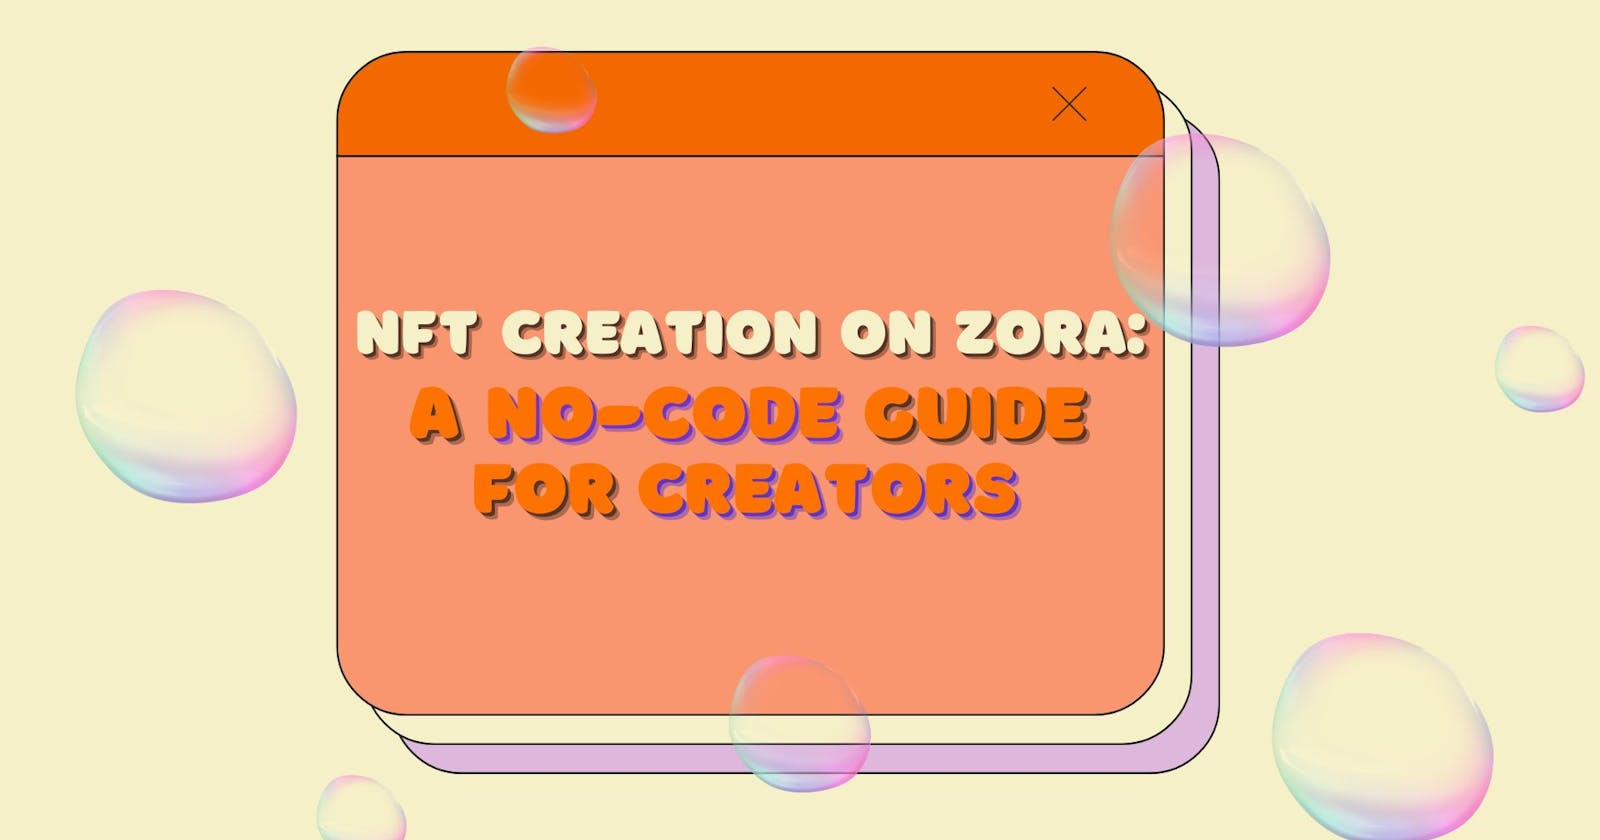 NFT Creation on Zora: A No Code Guide for Creators